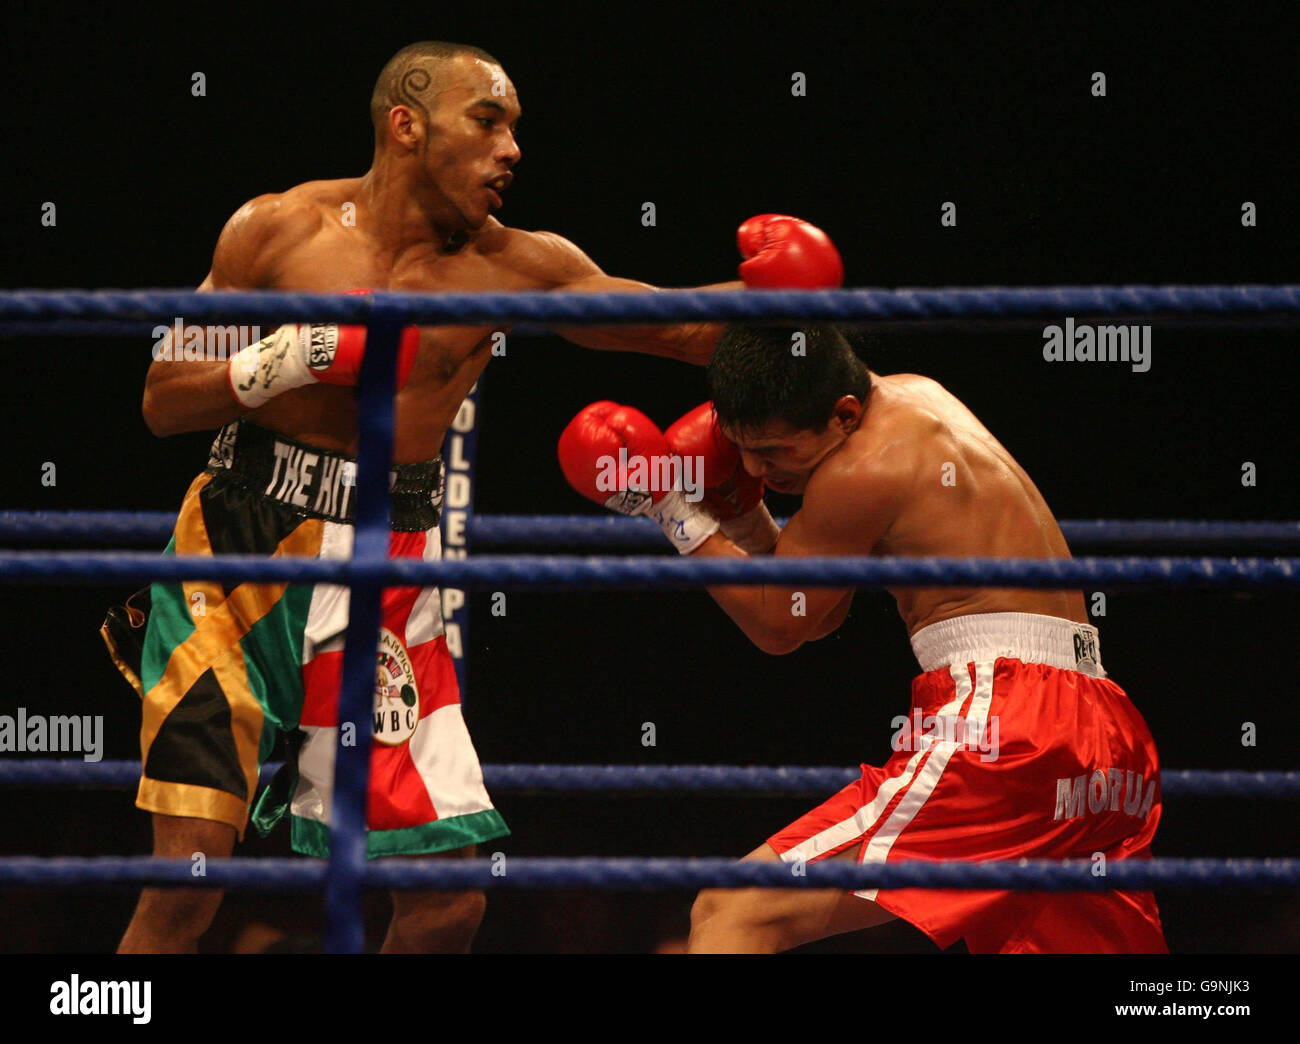 England's Junior Witter (left) in action against Mexico's Arturo Morua during the WBC Light Welterweight Title bout at Alexandra Palace, London. Stock Photo